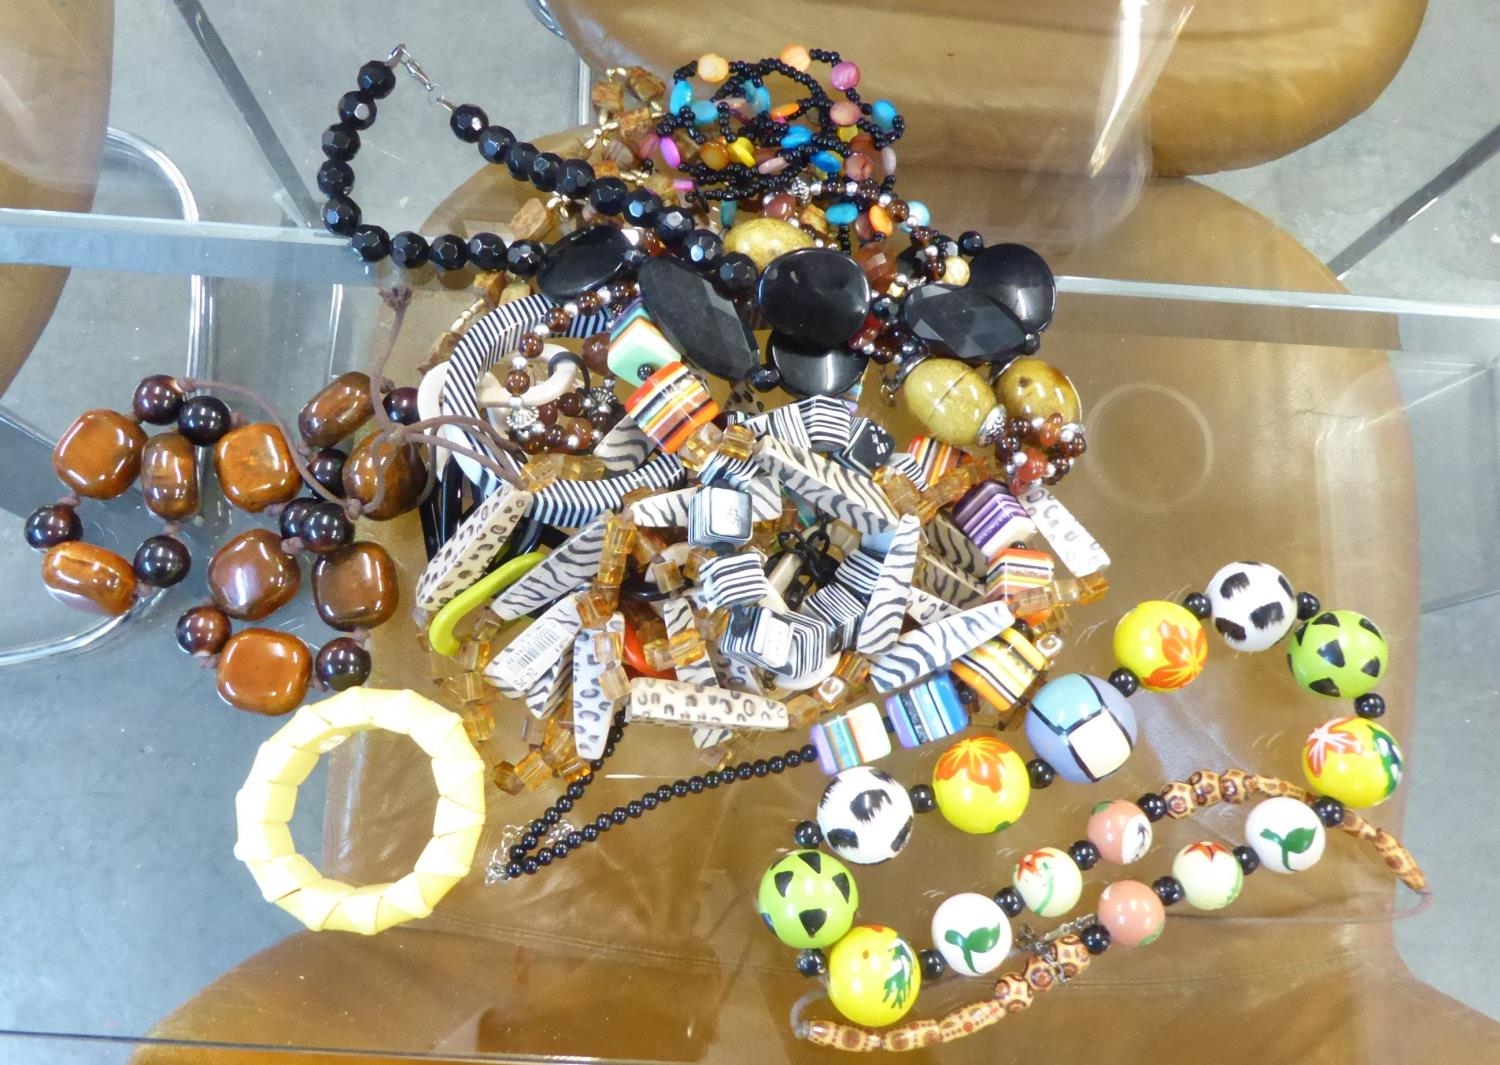 GROUP OF 1980's AND LATER PLASTIC JEWELLERY TO INCLUDE; LICORICE ALLSORTS NECKLACE, FAUX AMBER AND